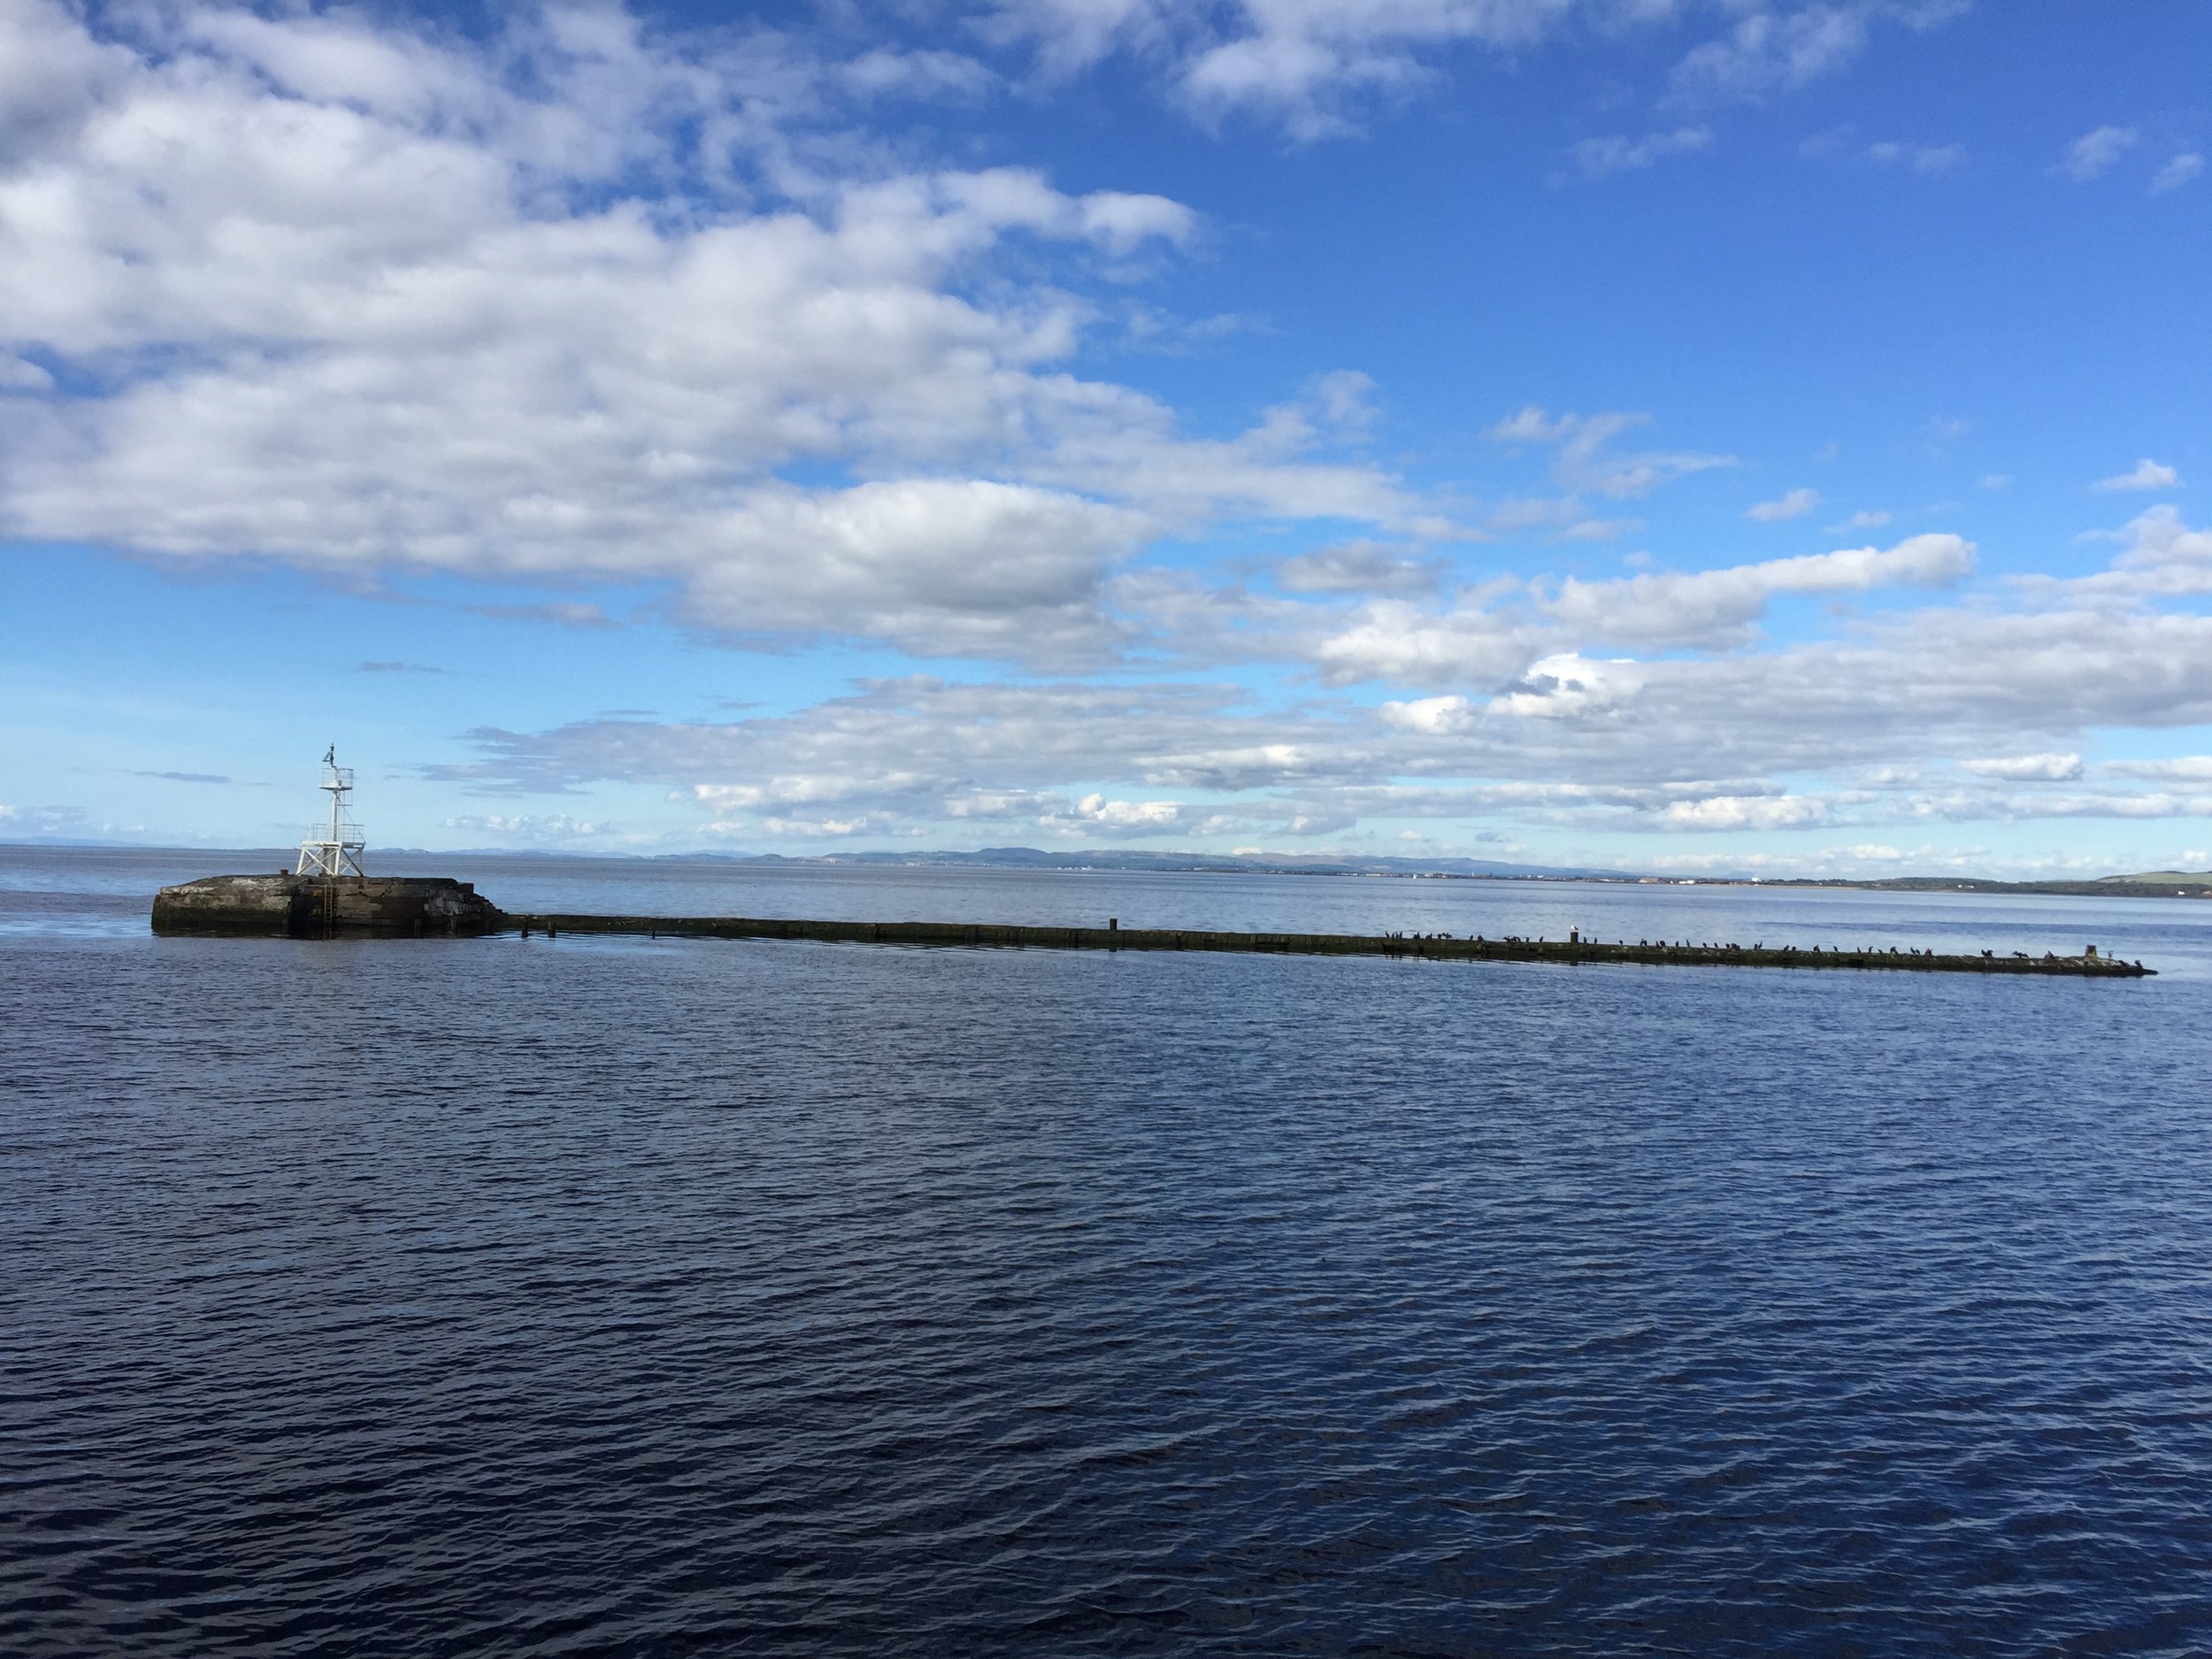 Looking North from Ayr harbour